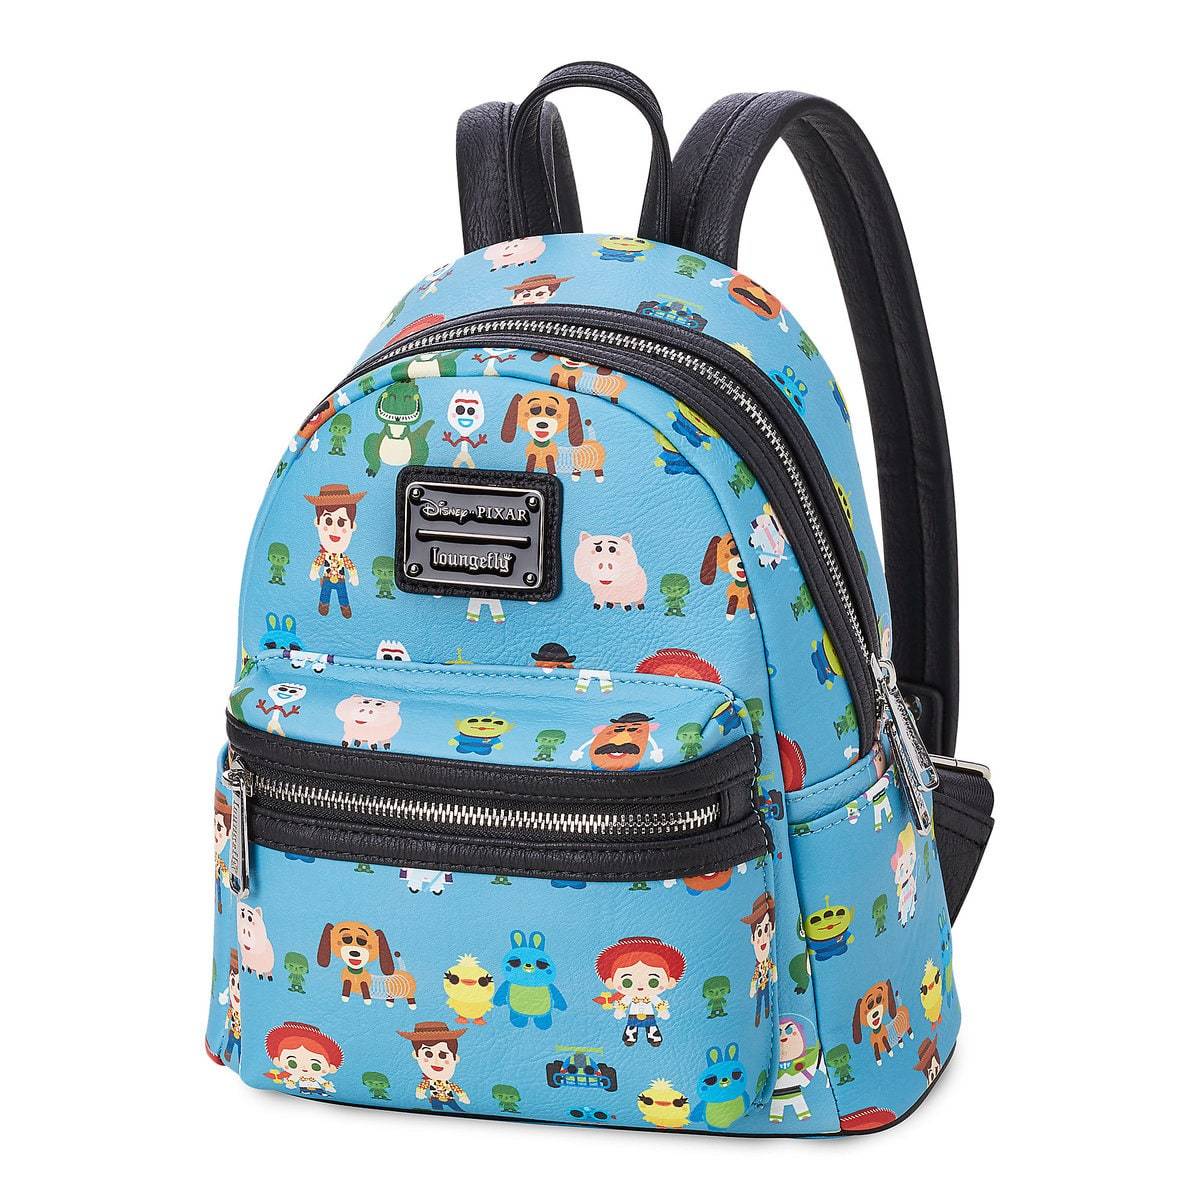 Disney Parks Toy Story 4 Mini Backpack by Loungefly Brand New - Theme ...